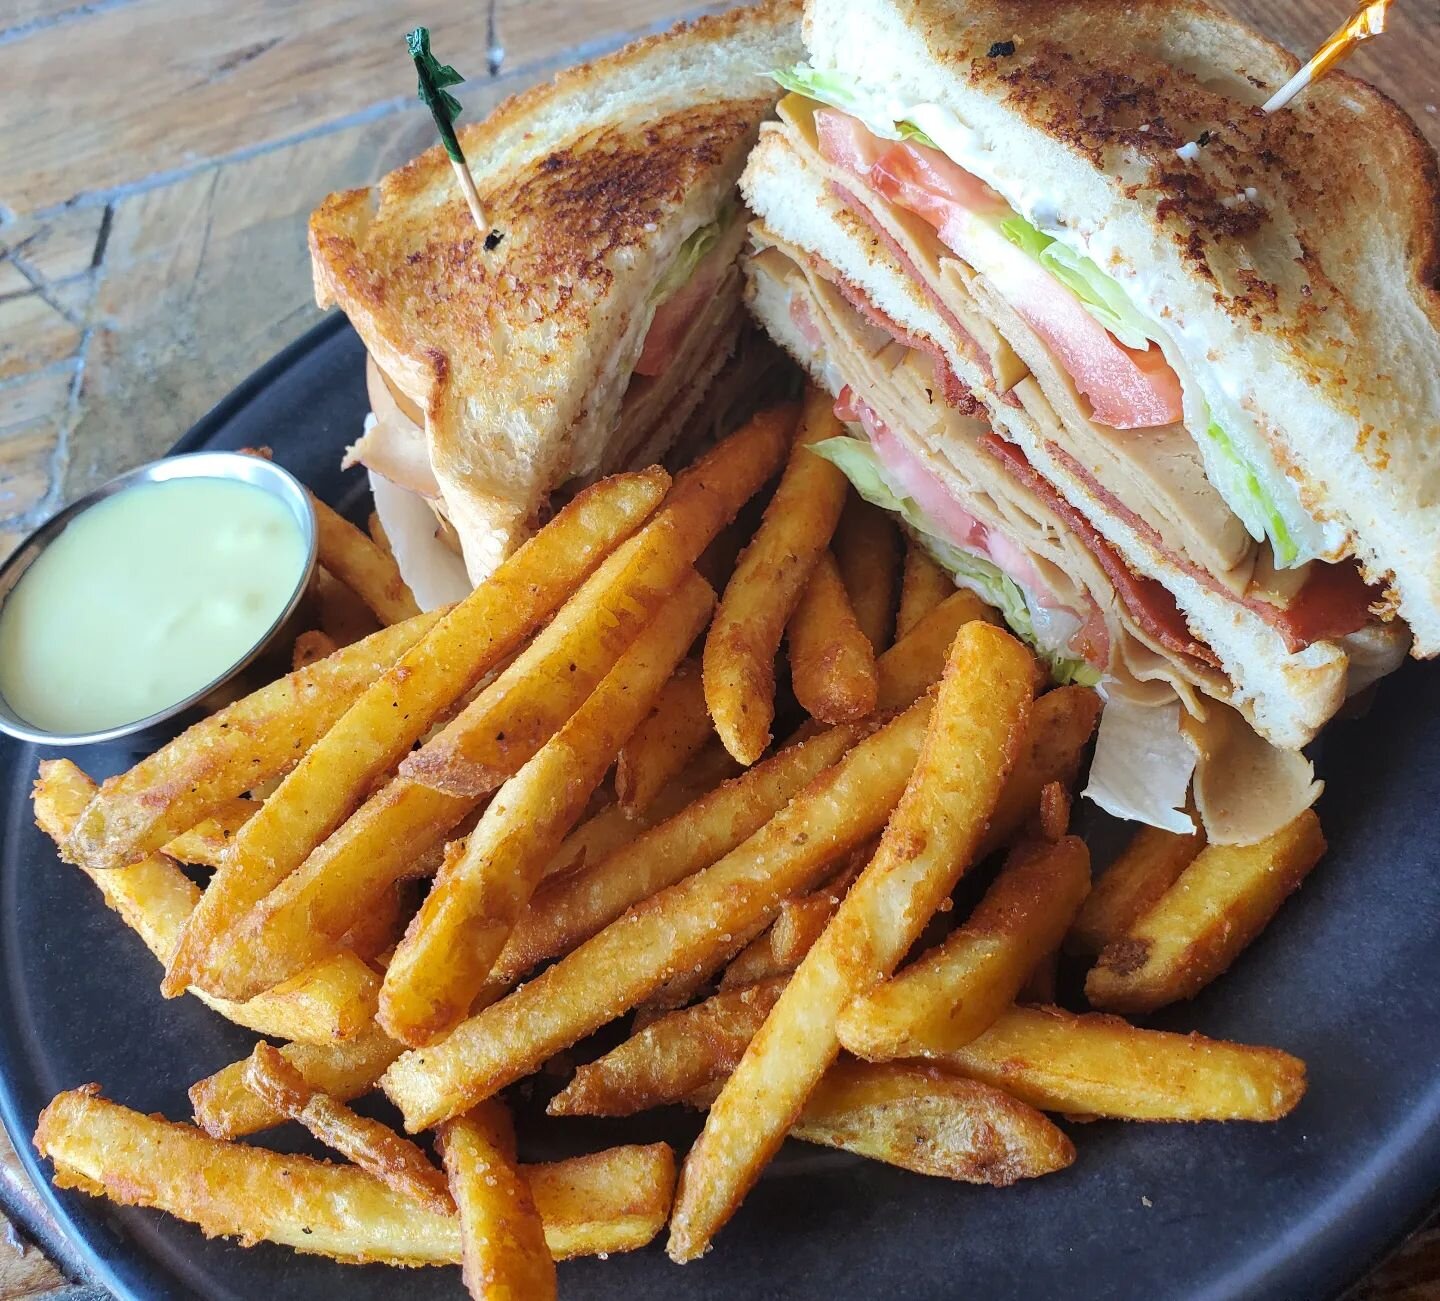 The Club Sandwich is finally back (Saturday) as our Special of the day!!! ☺
 Stacked Turkey, bacon, lettuce, tomato, and mayo on Texas toast and served with our house made honey mustard!  Comes with one side. 

 #vegansandwiches #cooperyoung #memphis